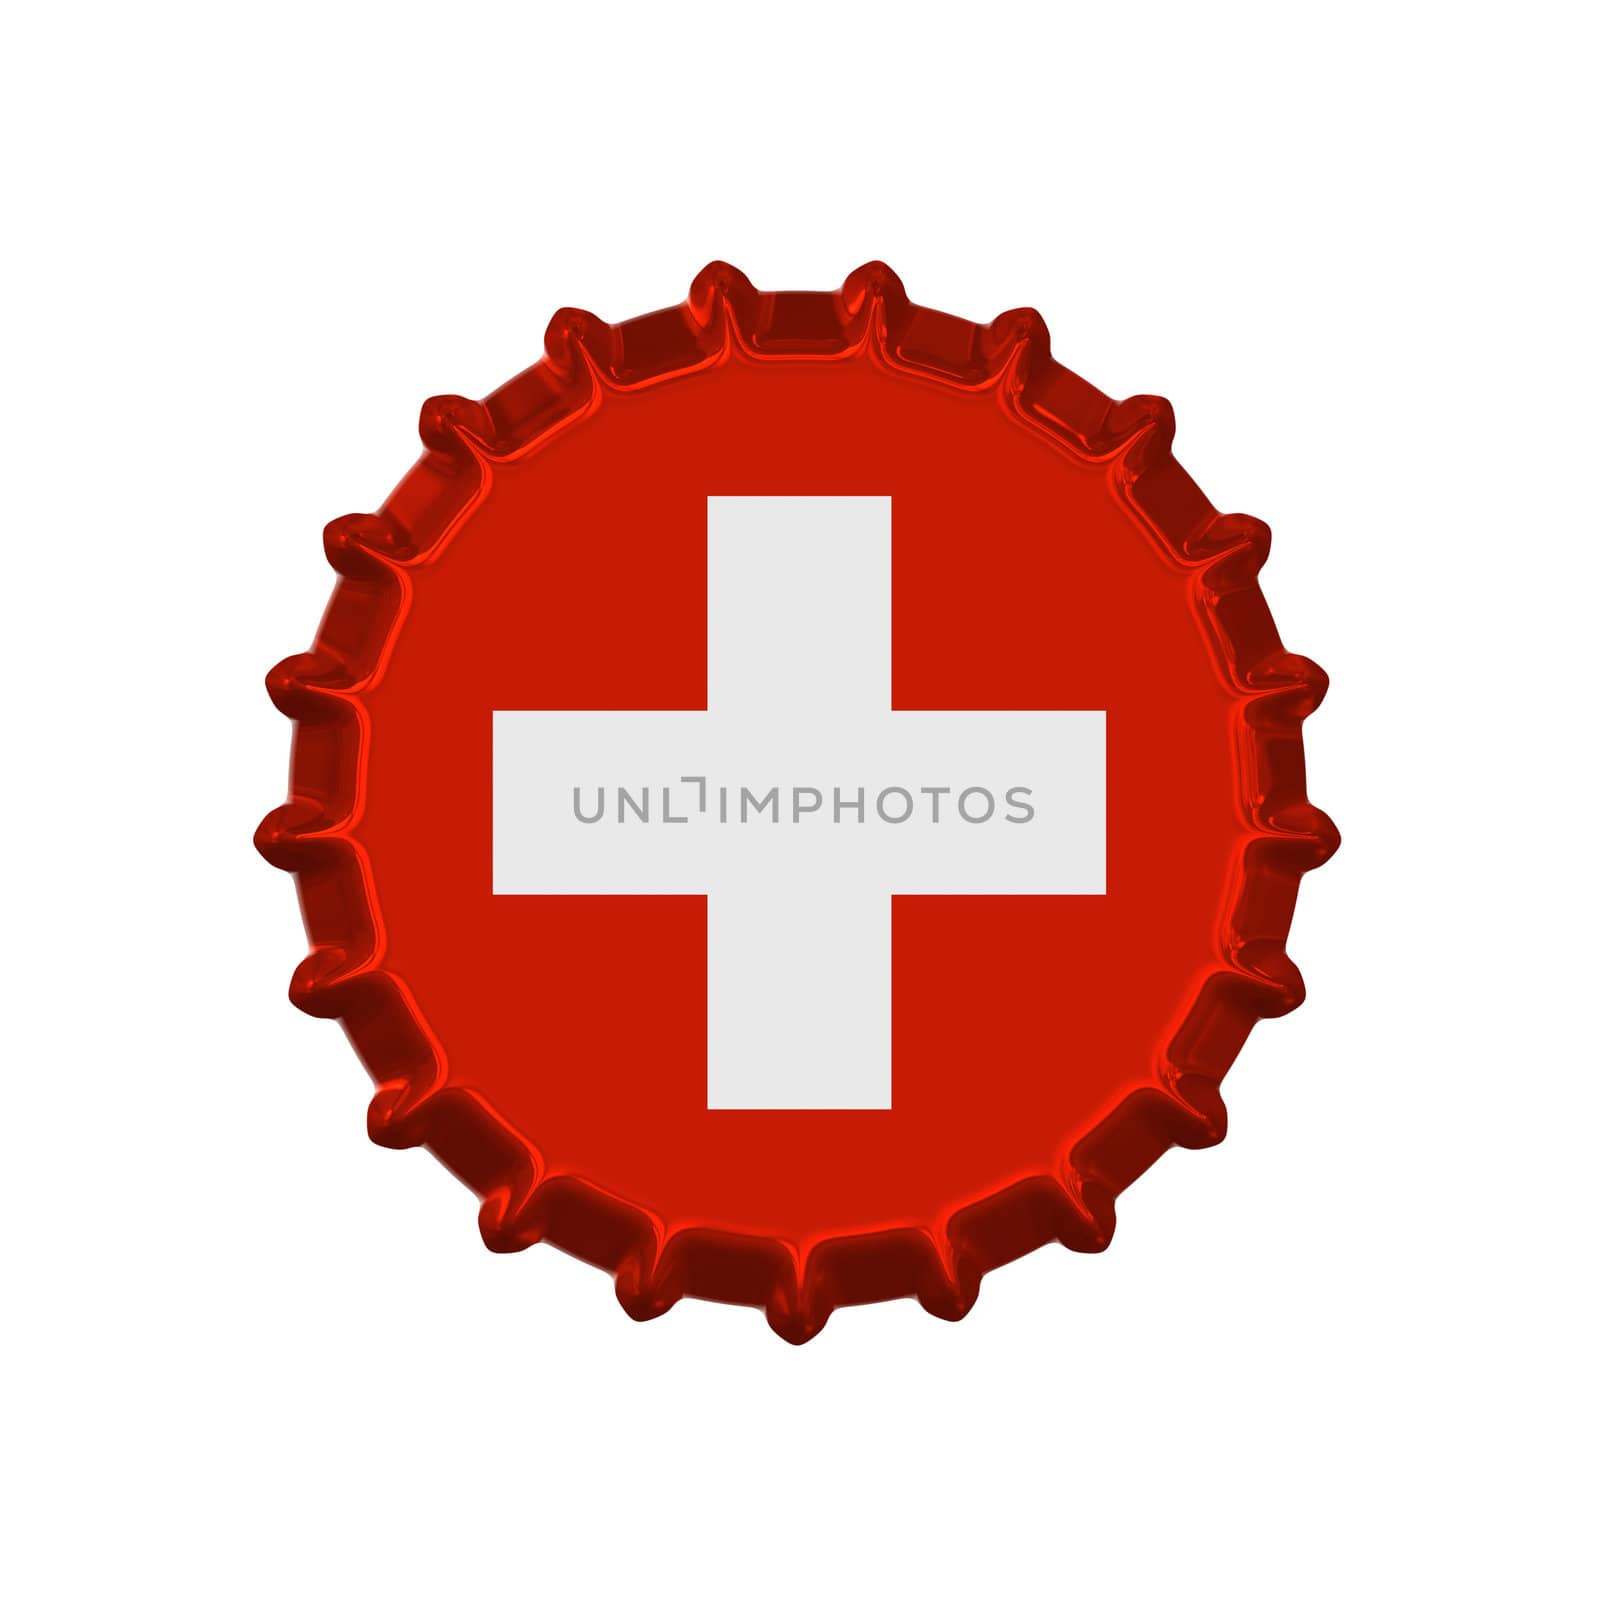 An illustration of a bottle cap with a country sign swiss